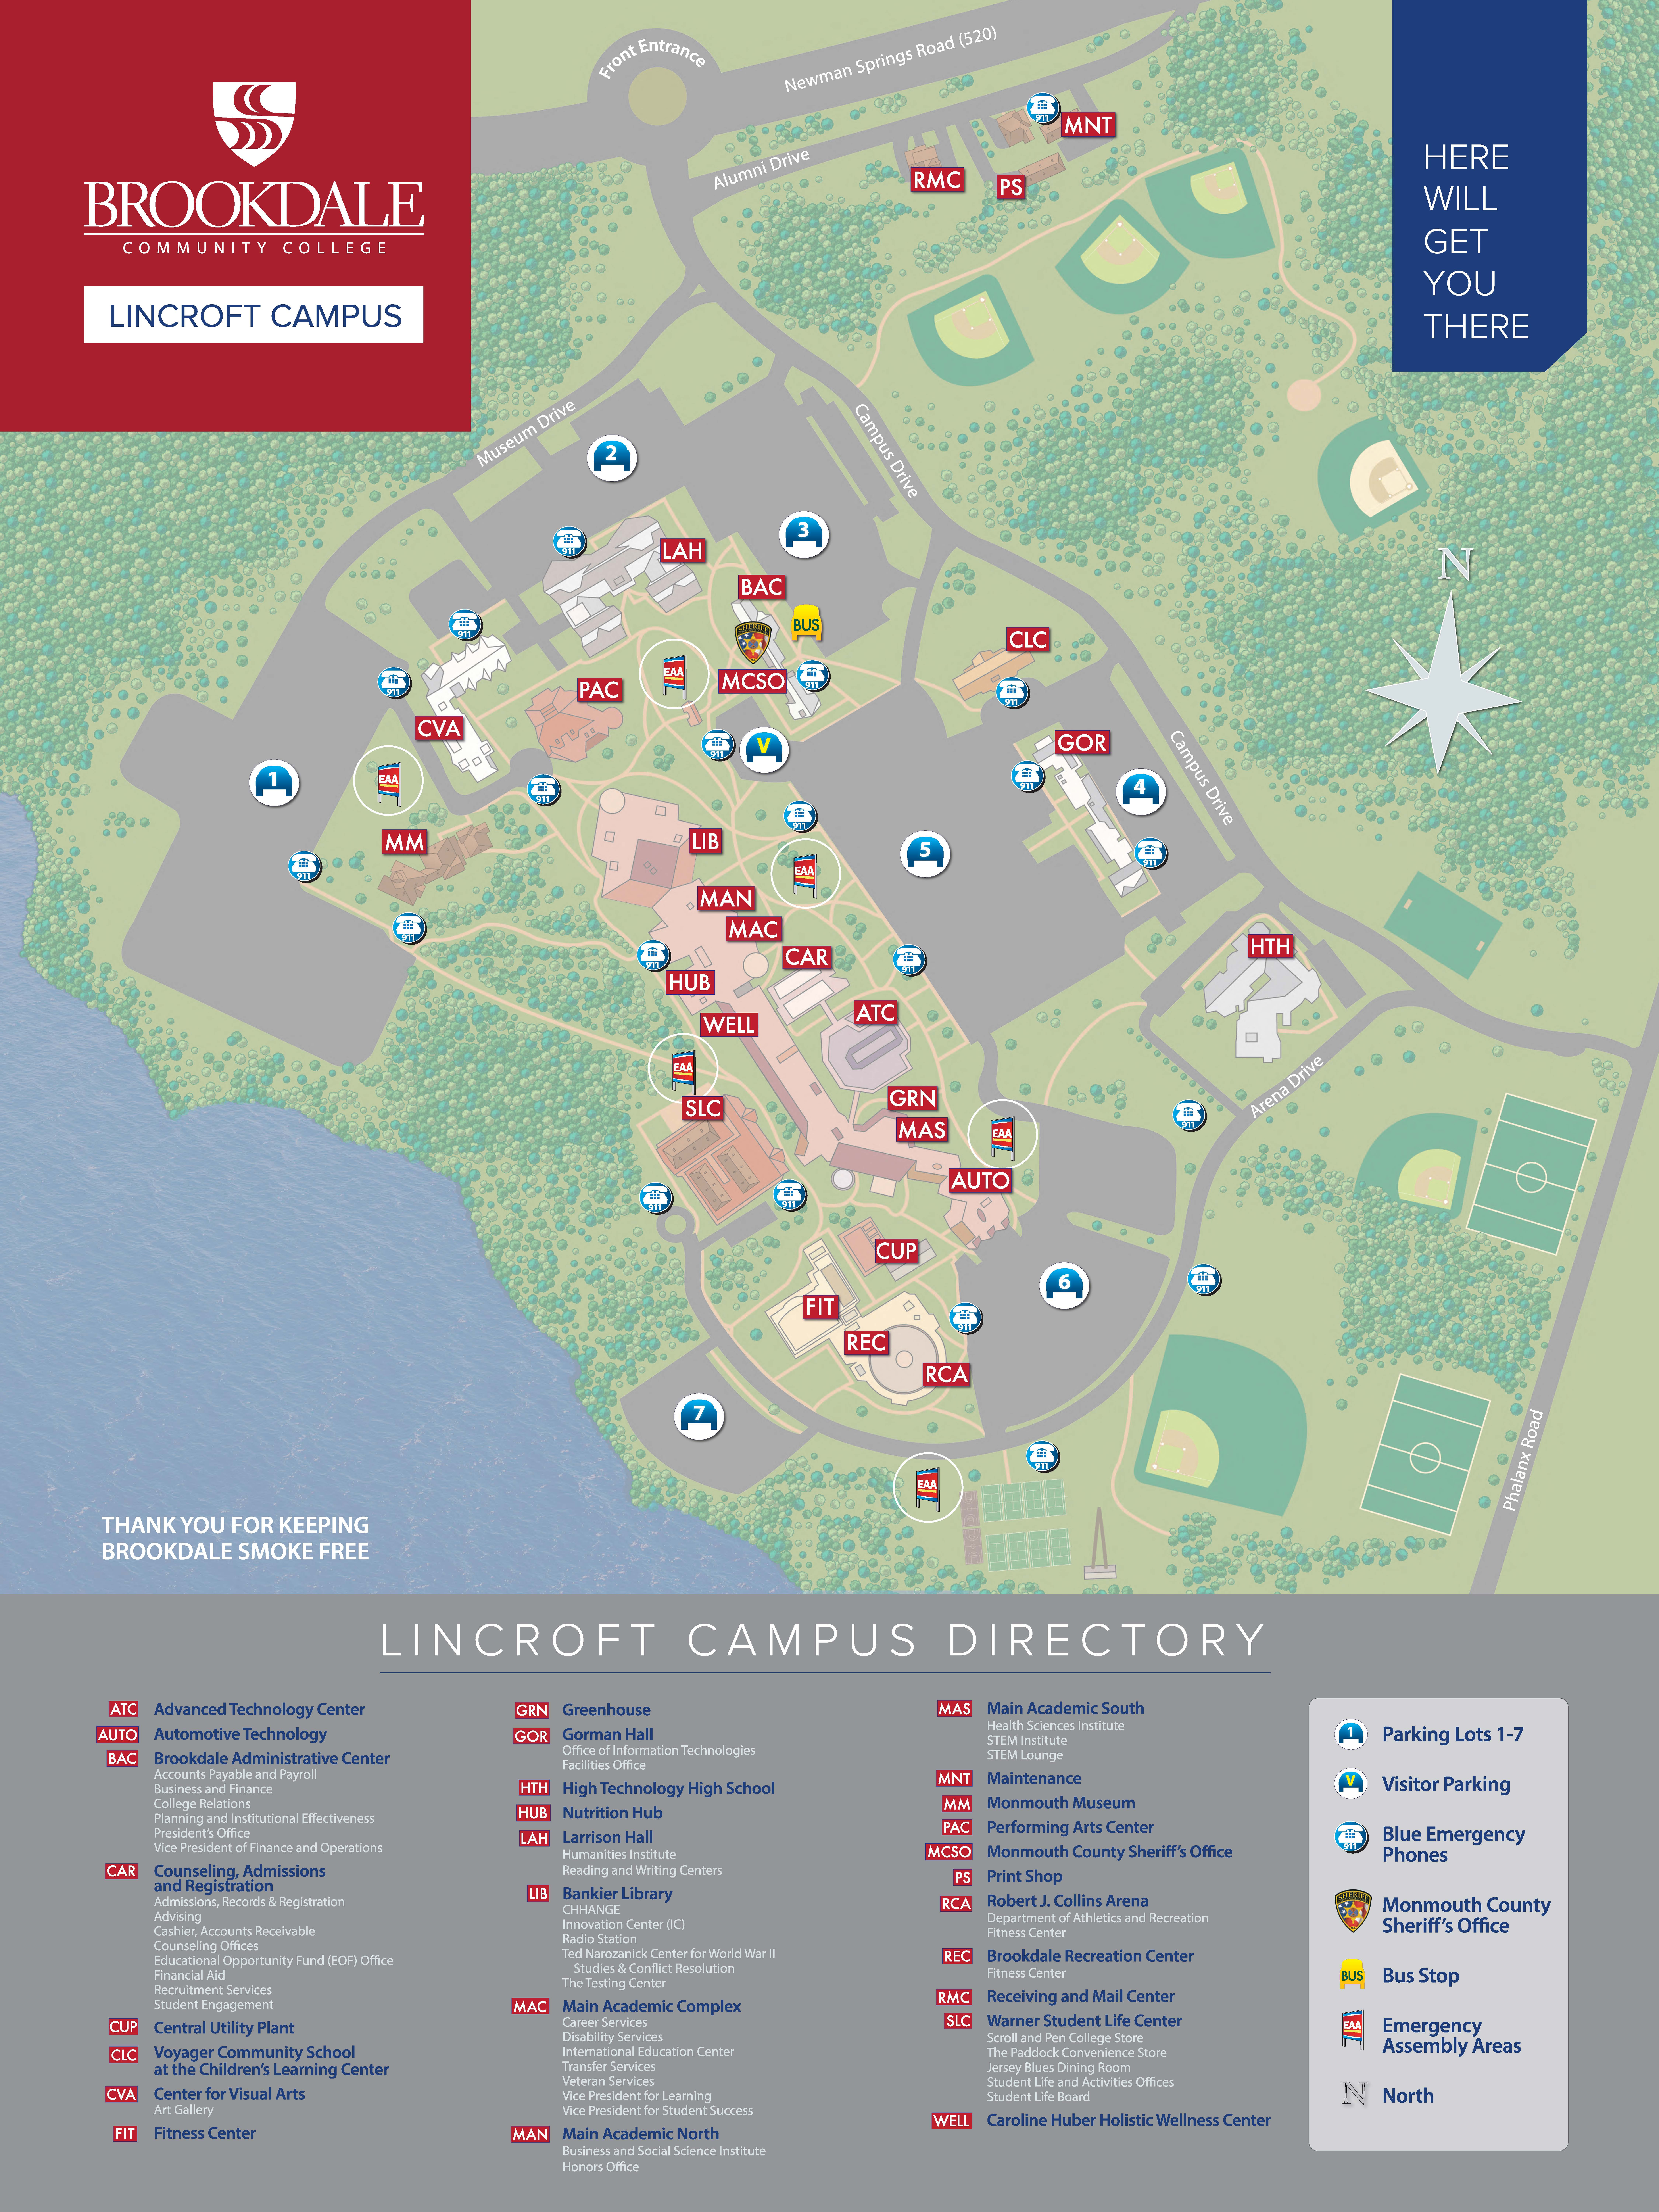 campus map with location of buildings and emergency phones and assembly areas.